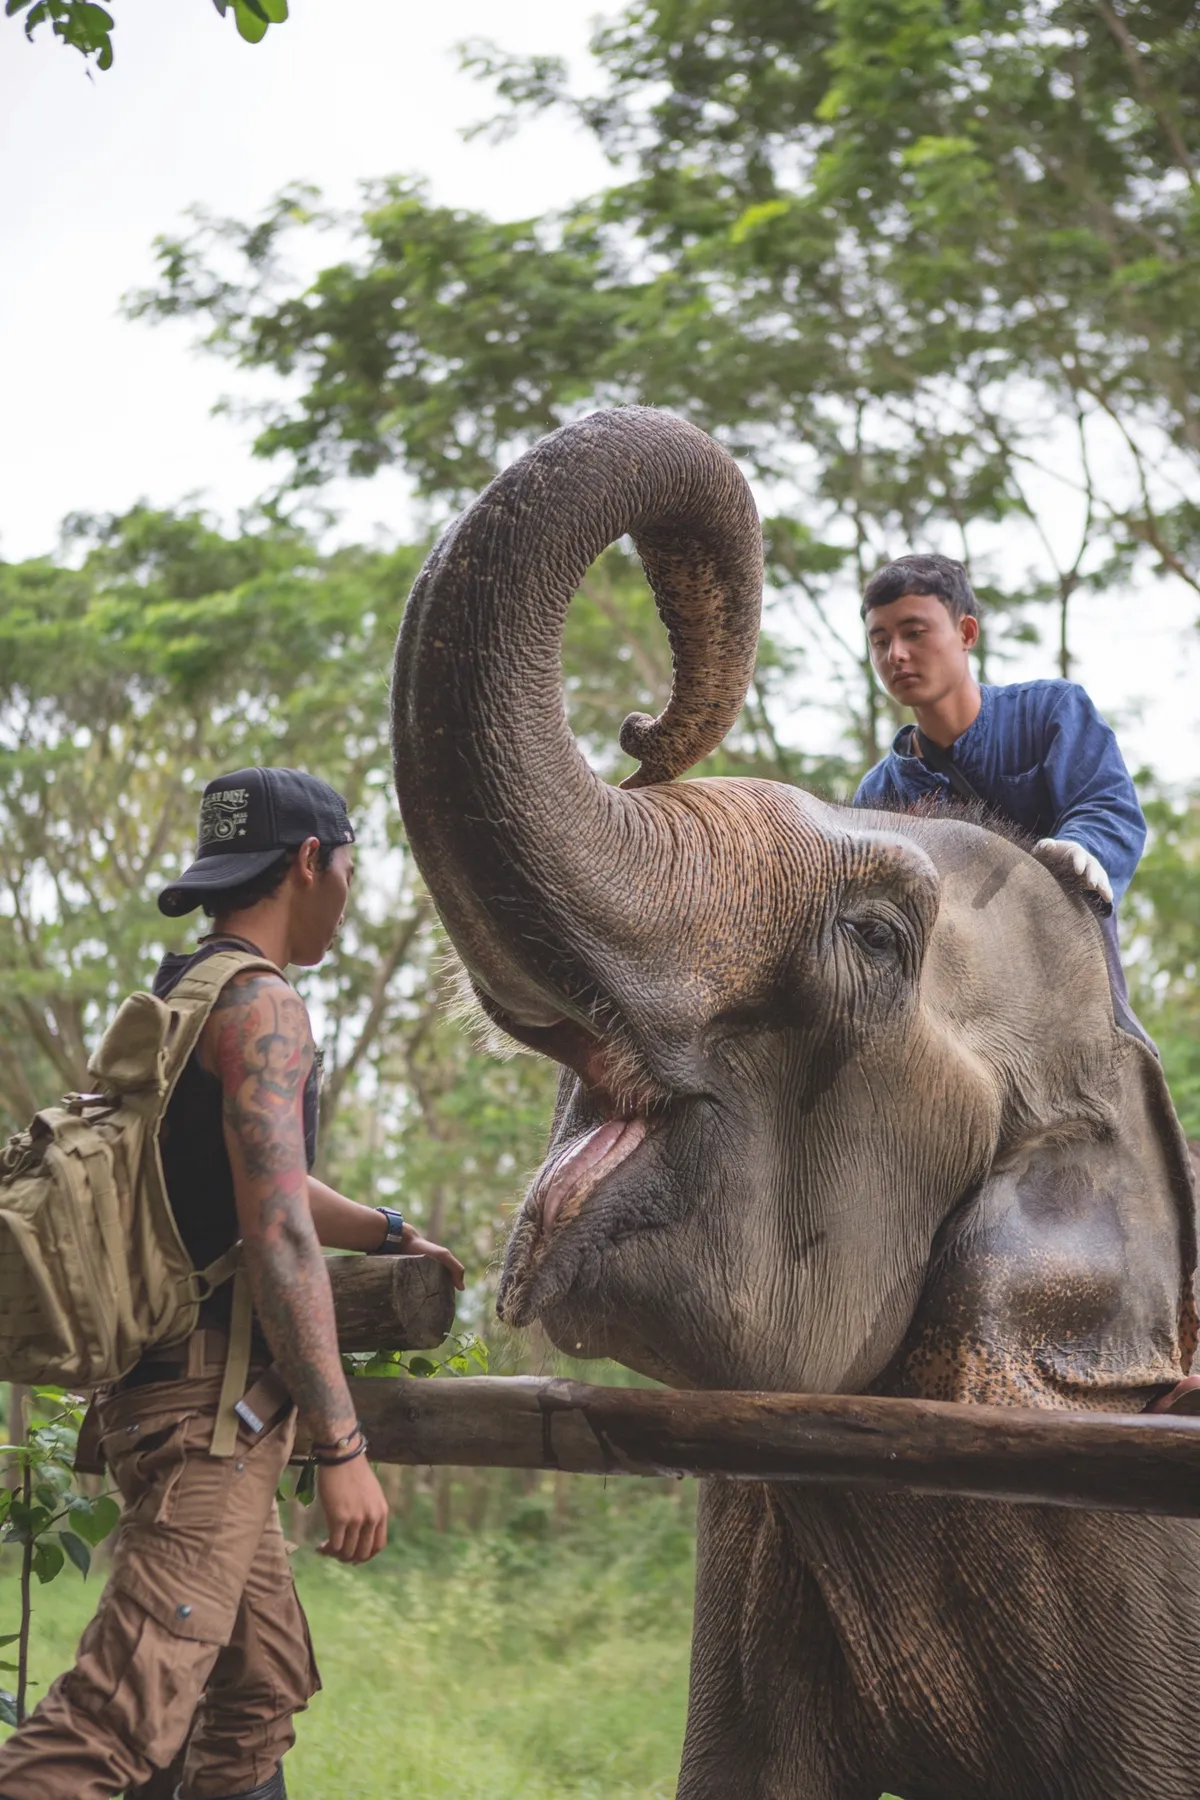 Vets check the health of a resident. They are the only people allowed to sit on the sanctuary's elephants. © Abi Campbell